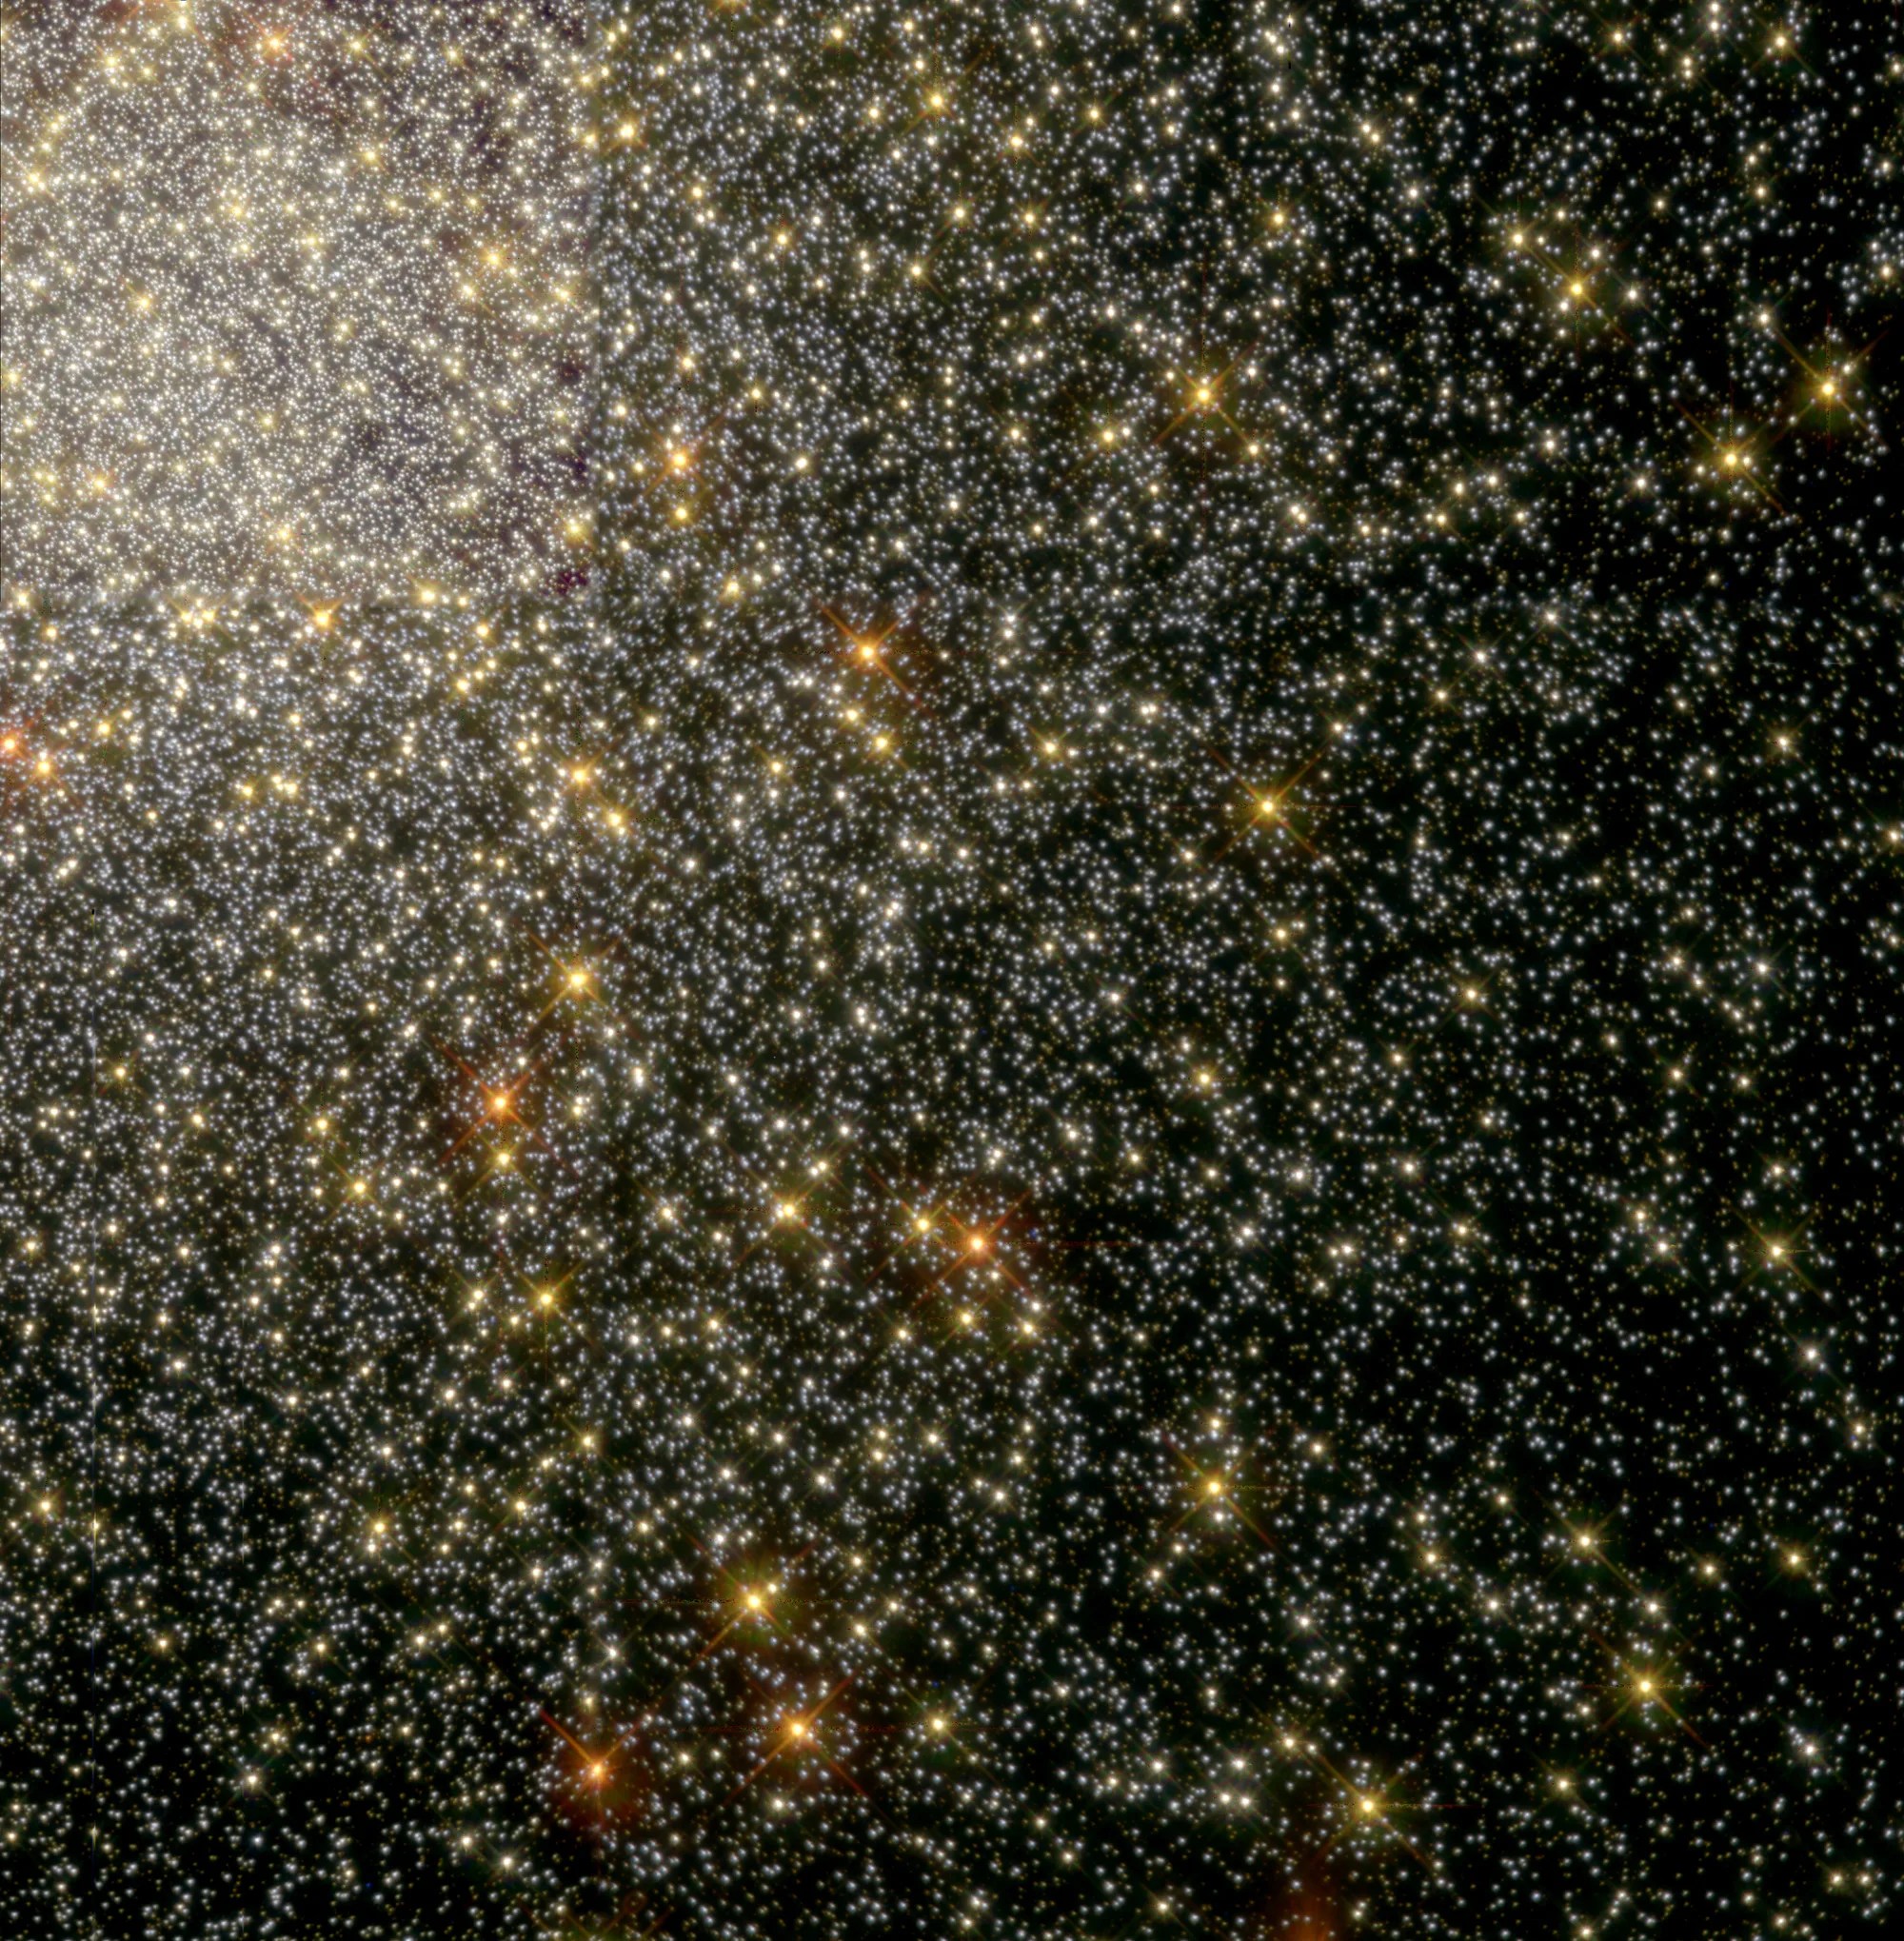 A mass of yellow and white stars fill the upper-left corner and taper off toward the lower-right corner. Reddish-orange stars dot the scene, all on a black background.